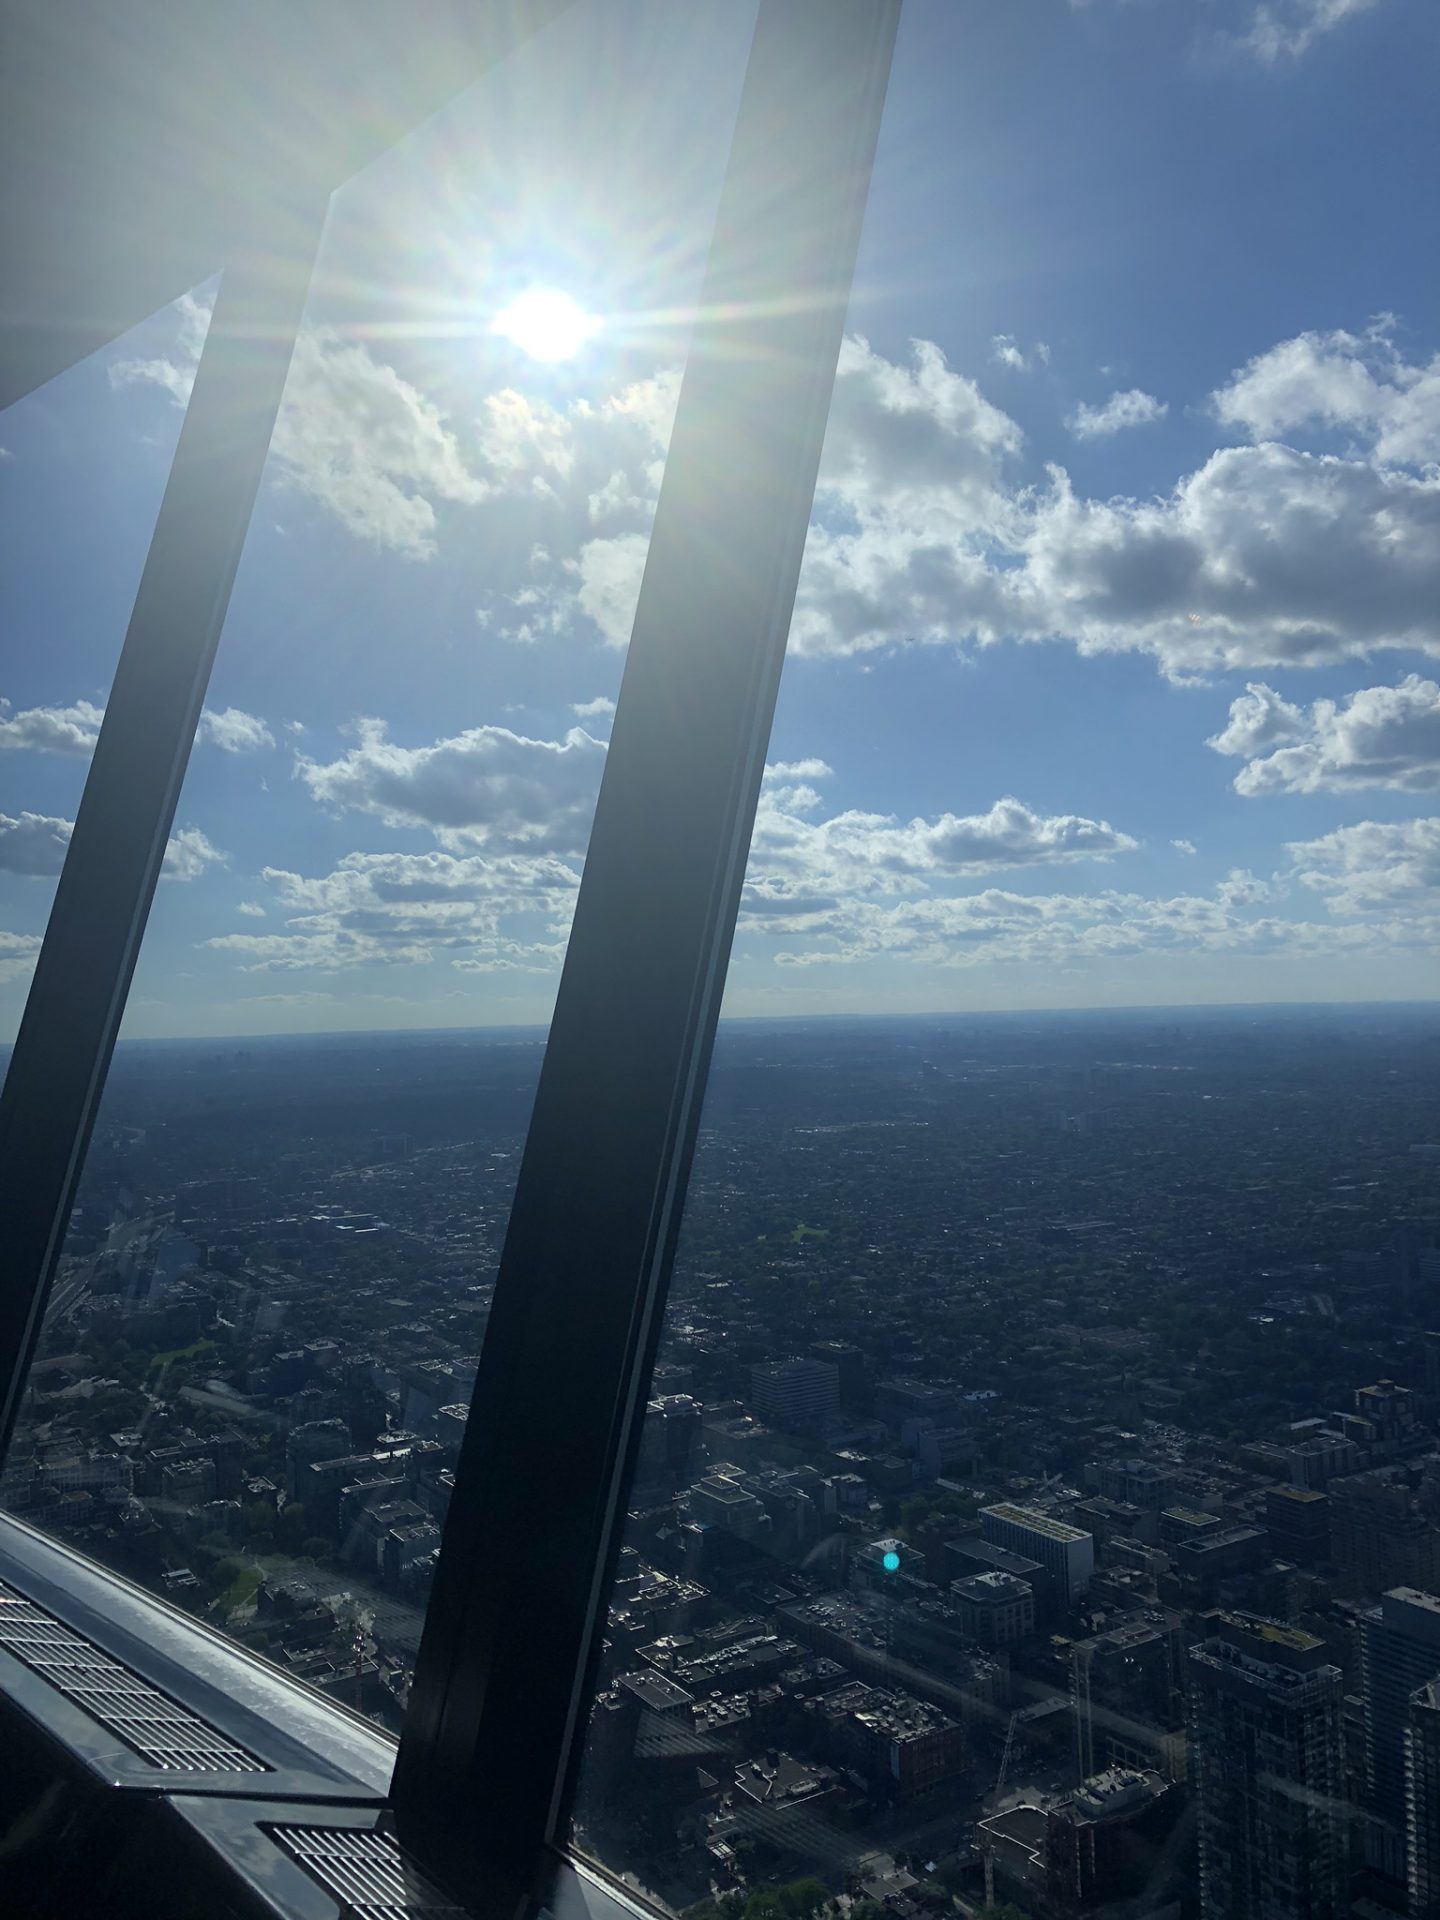 Summer in Toronto: Views from the CN Tower